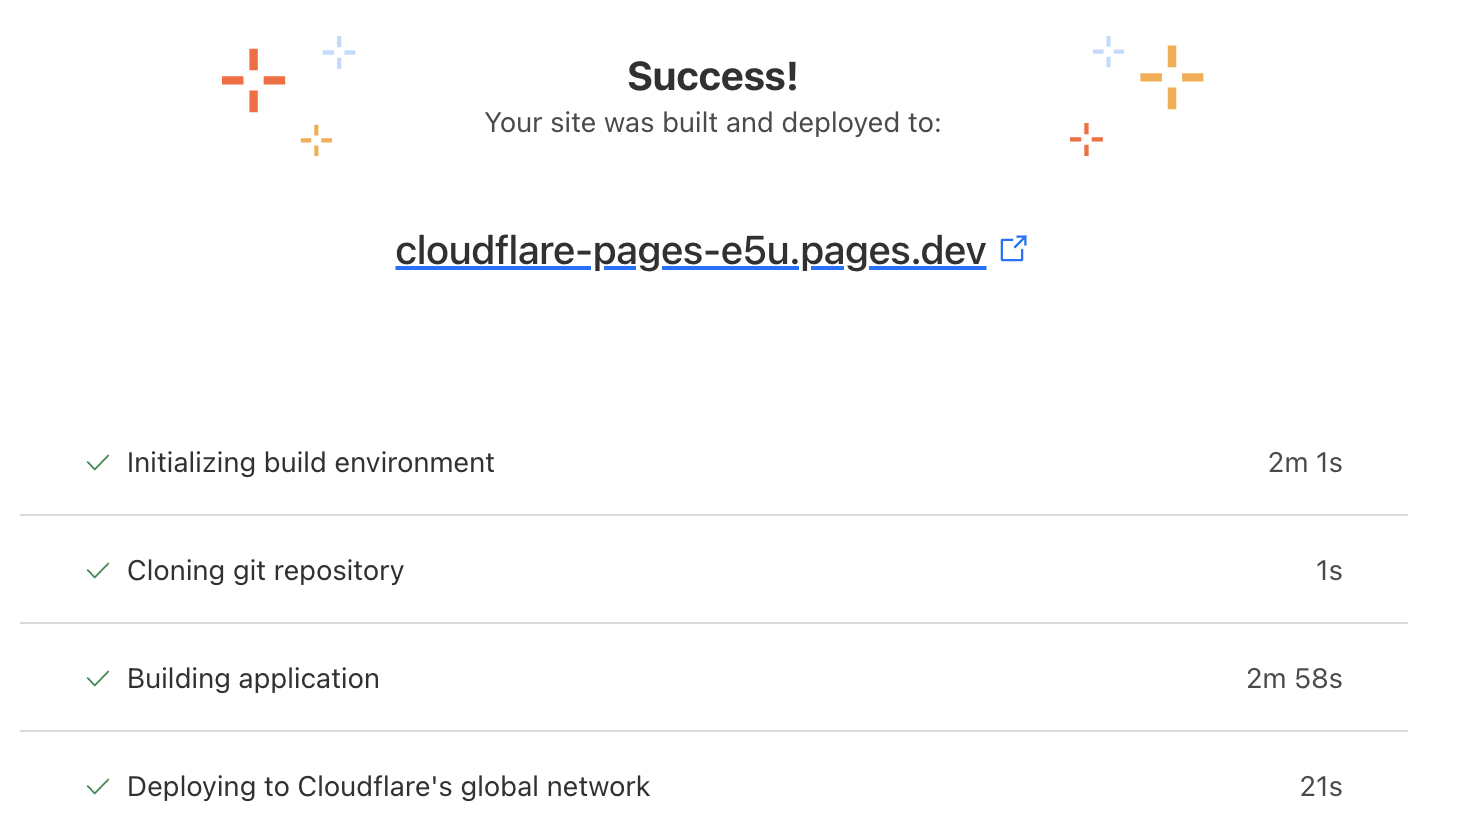 cloudflare-pages-success